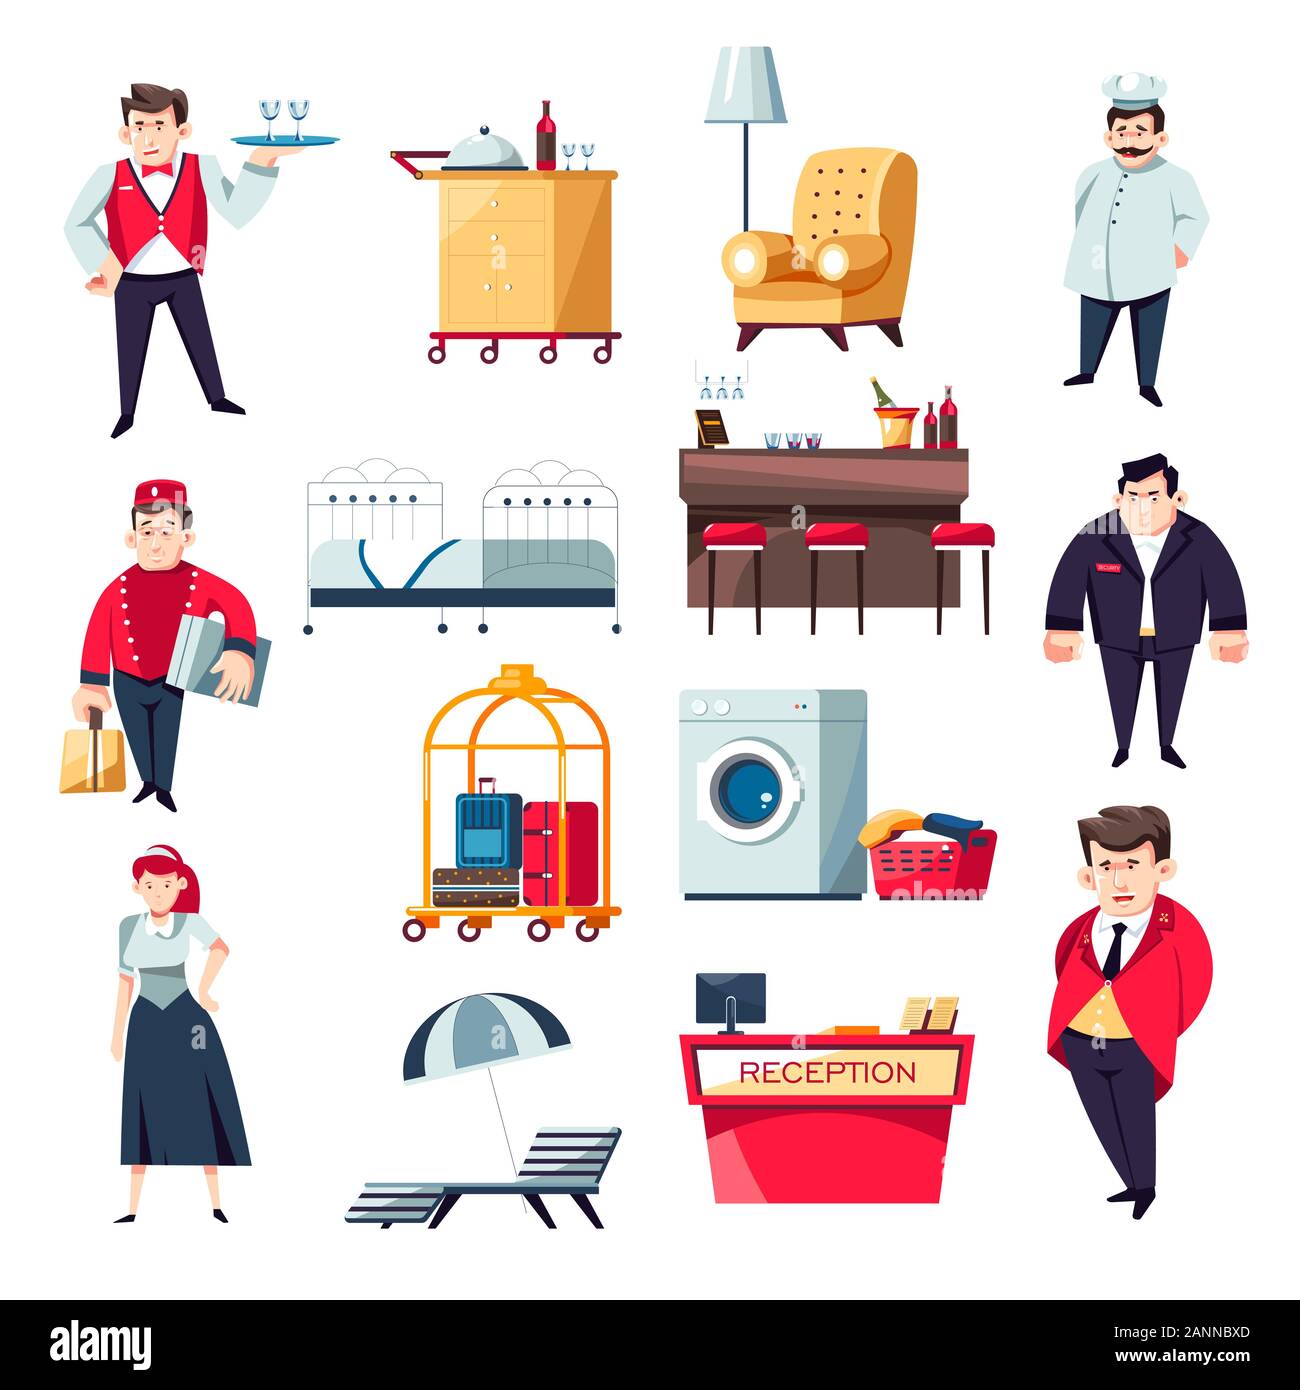 Hotel services concept and staff collection of icons Stock Vector